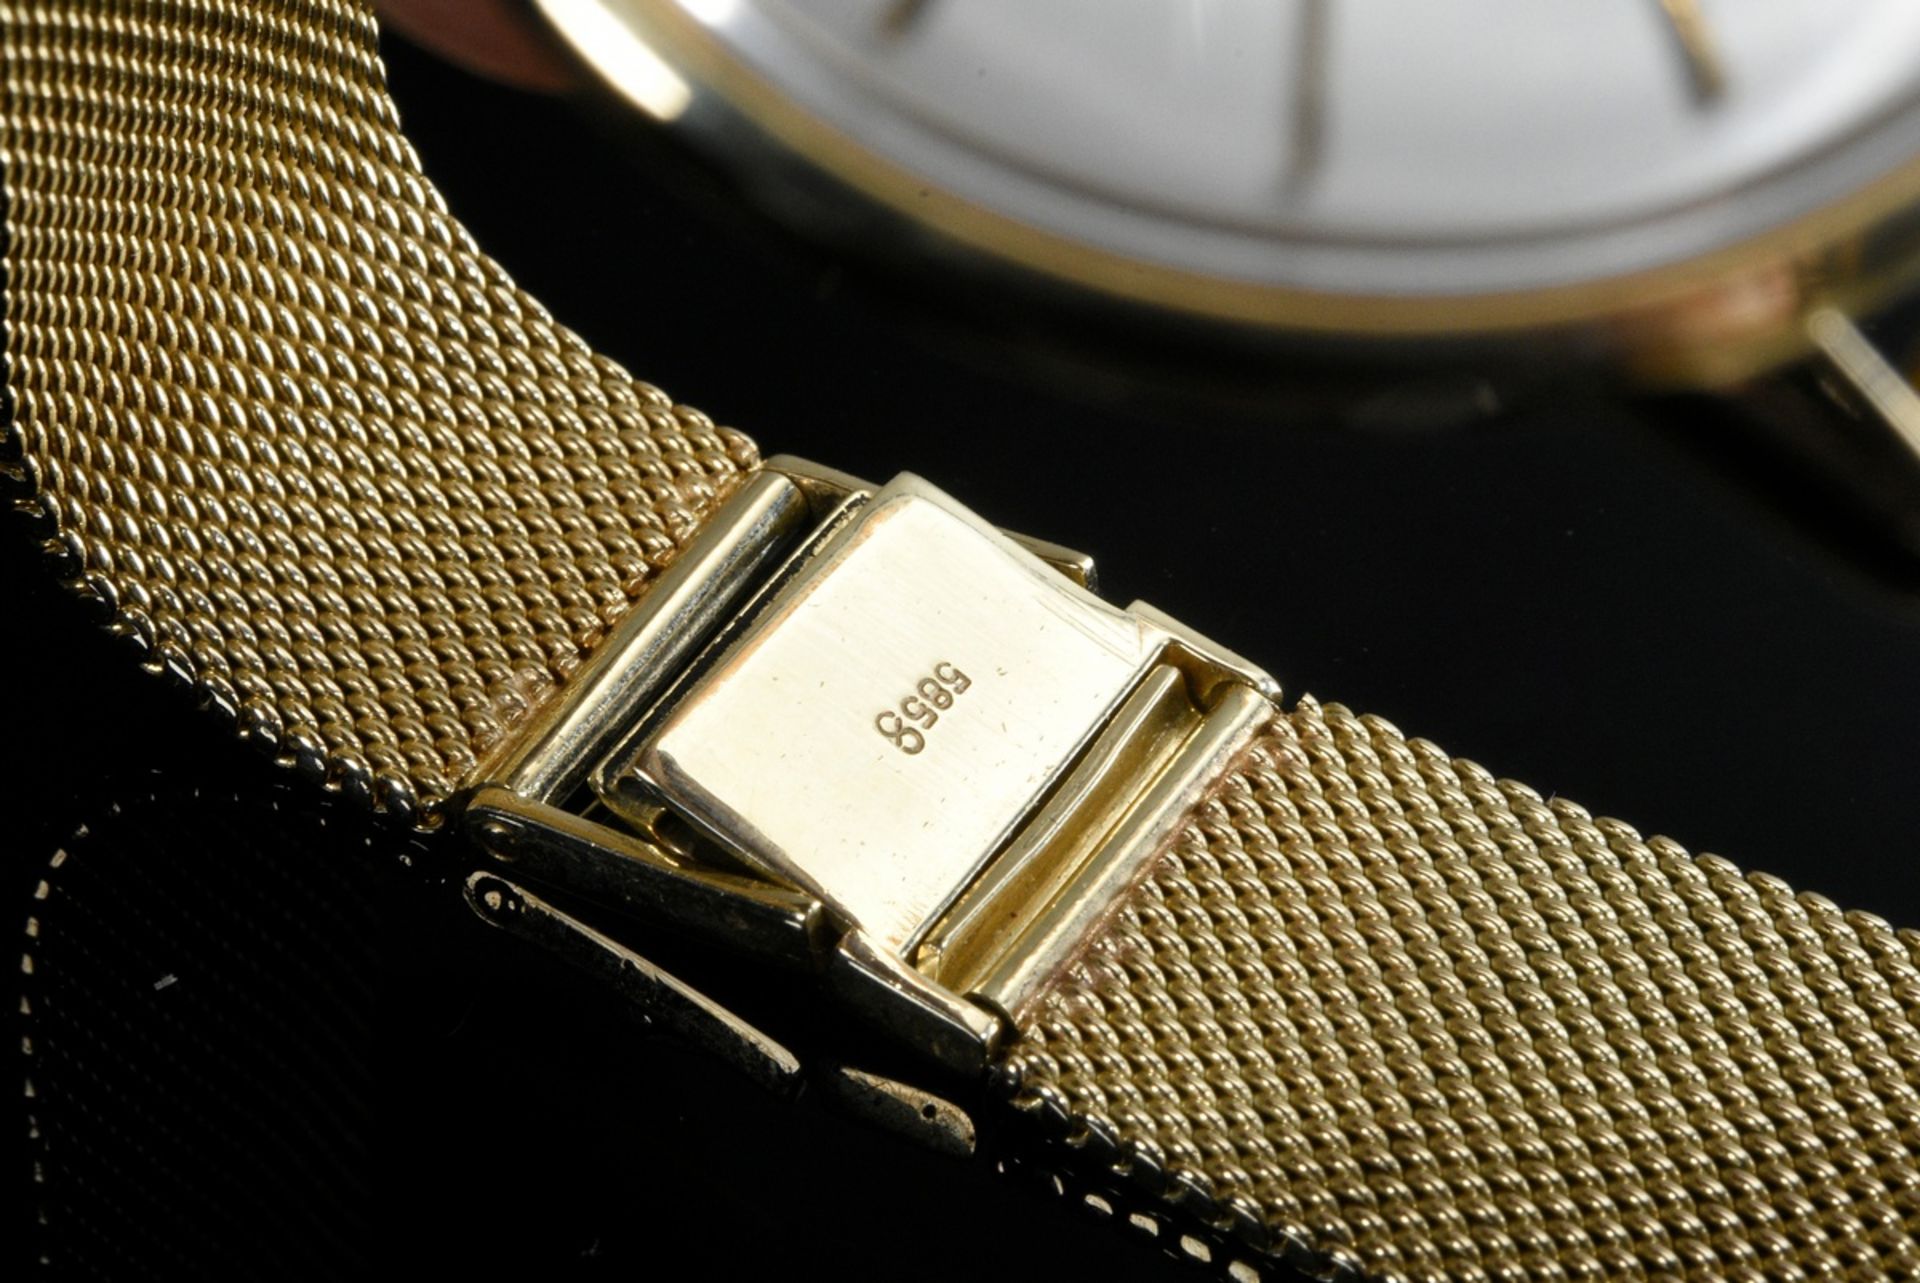 BWC Swiss yellow gold 585 men's wristwatch, automatic, Milanaise bracelet (worn), hour markers, lar - Image 3 of 4